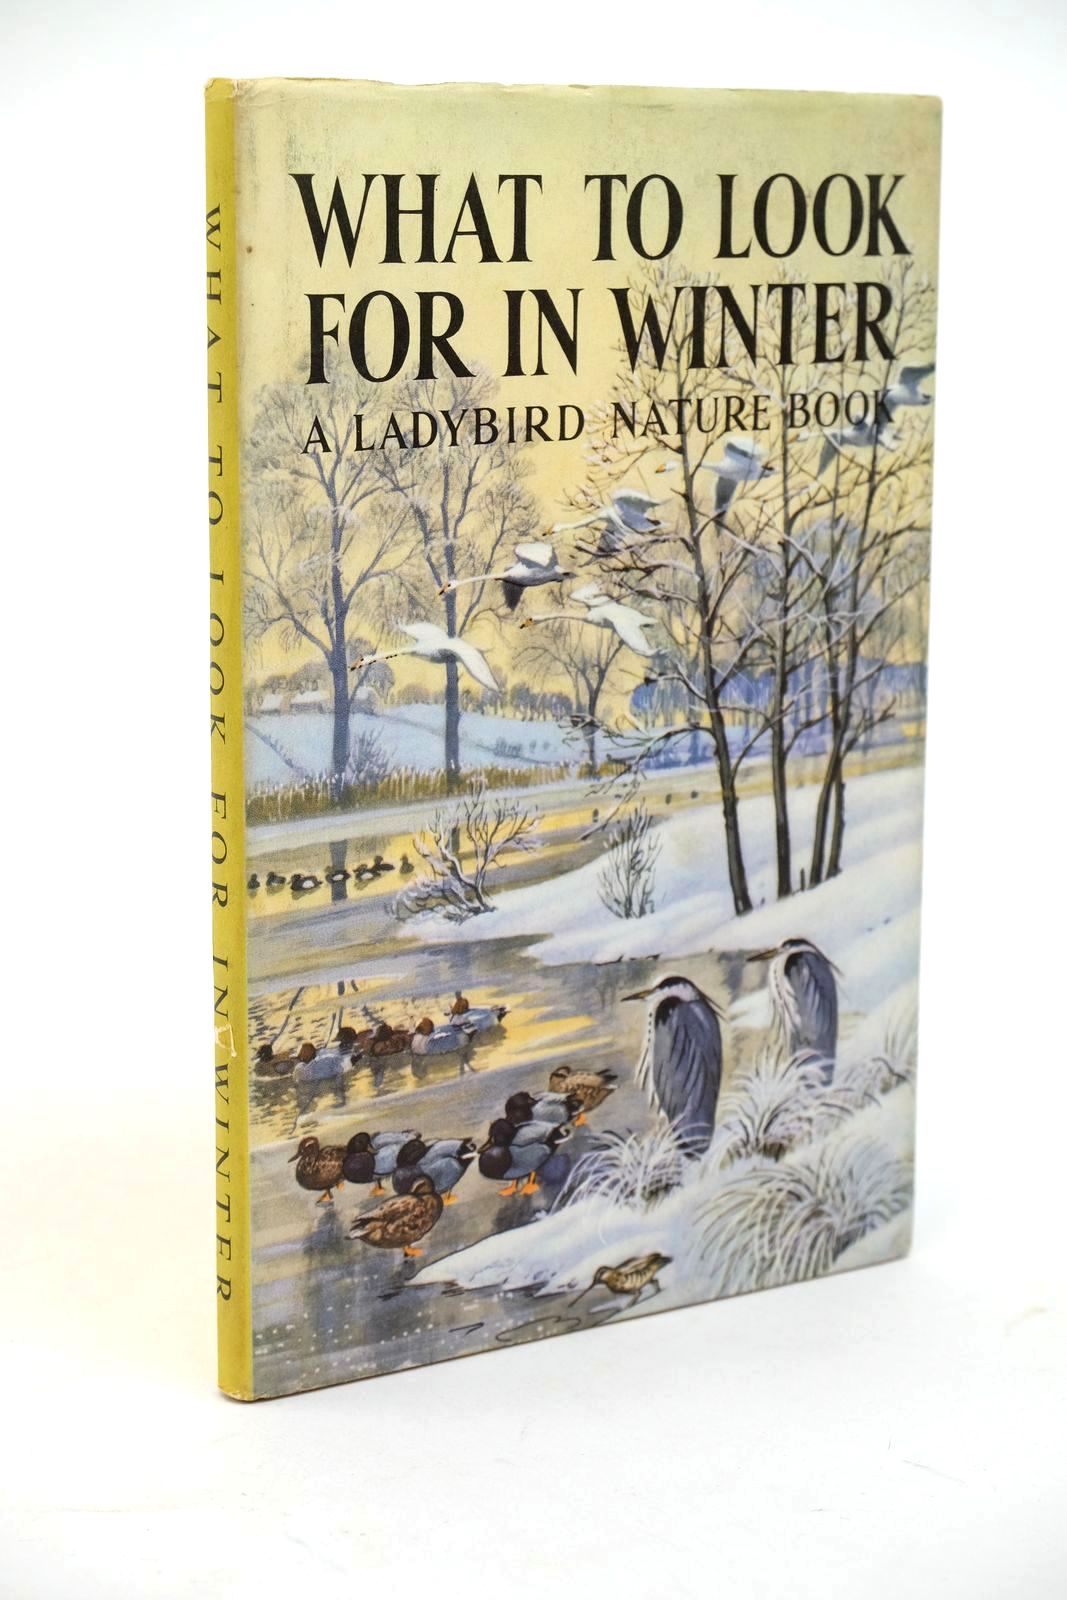 Photo of WHAT TO LOOK FOR IN WINTER written by Watson, E.L. Grant illustrated by Tunnicliffe, C.F. published by Wills & Hepworth Ltd. (STOCK CODE: 1323143)  for sale by Stella & Rose's Books